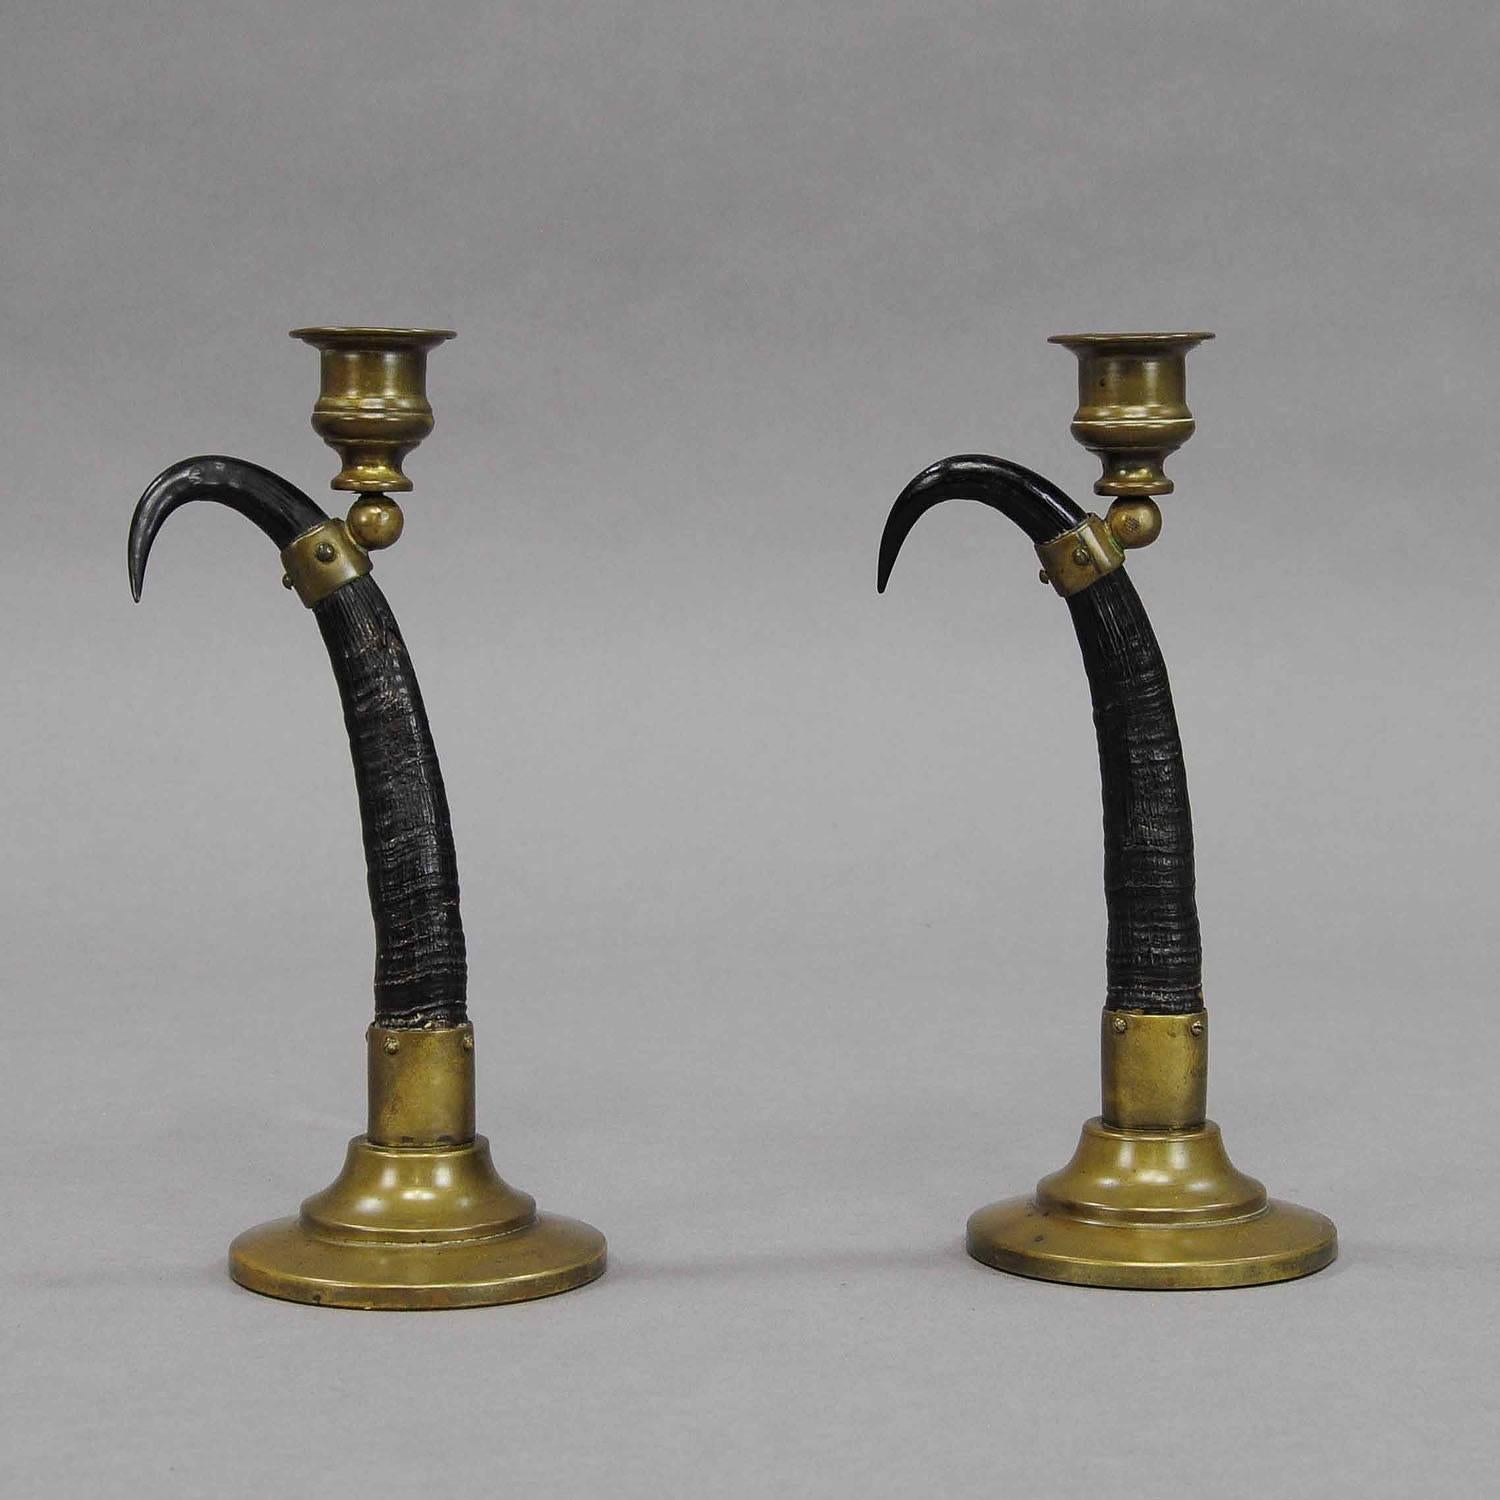 Two antique candleholders made of real chamois horns. Base and spouts made of brass, Germany, circa 1880.